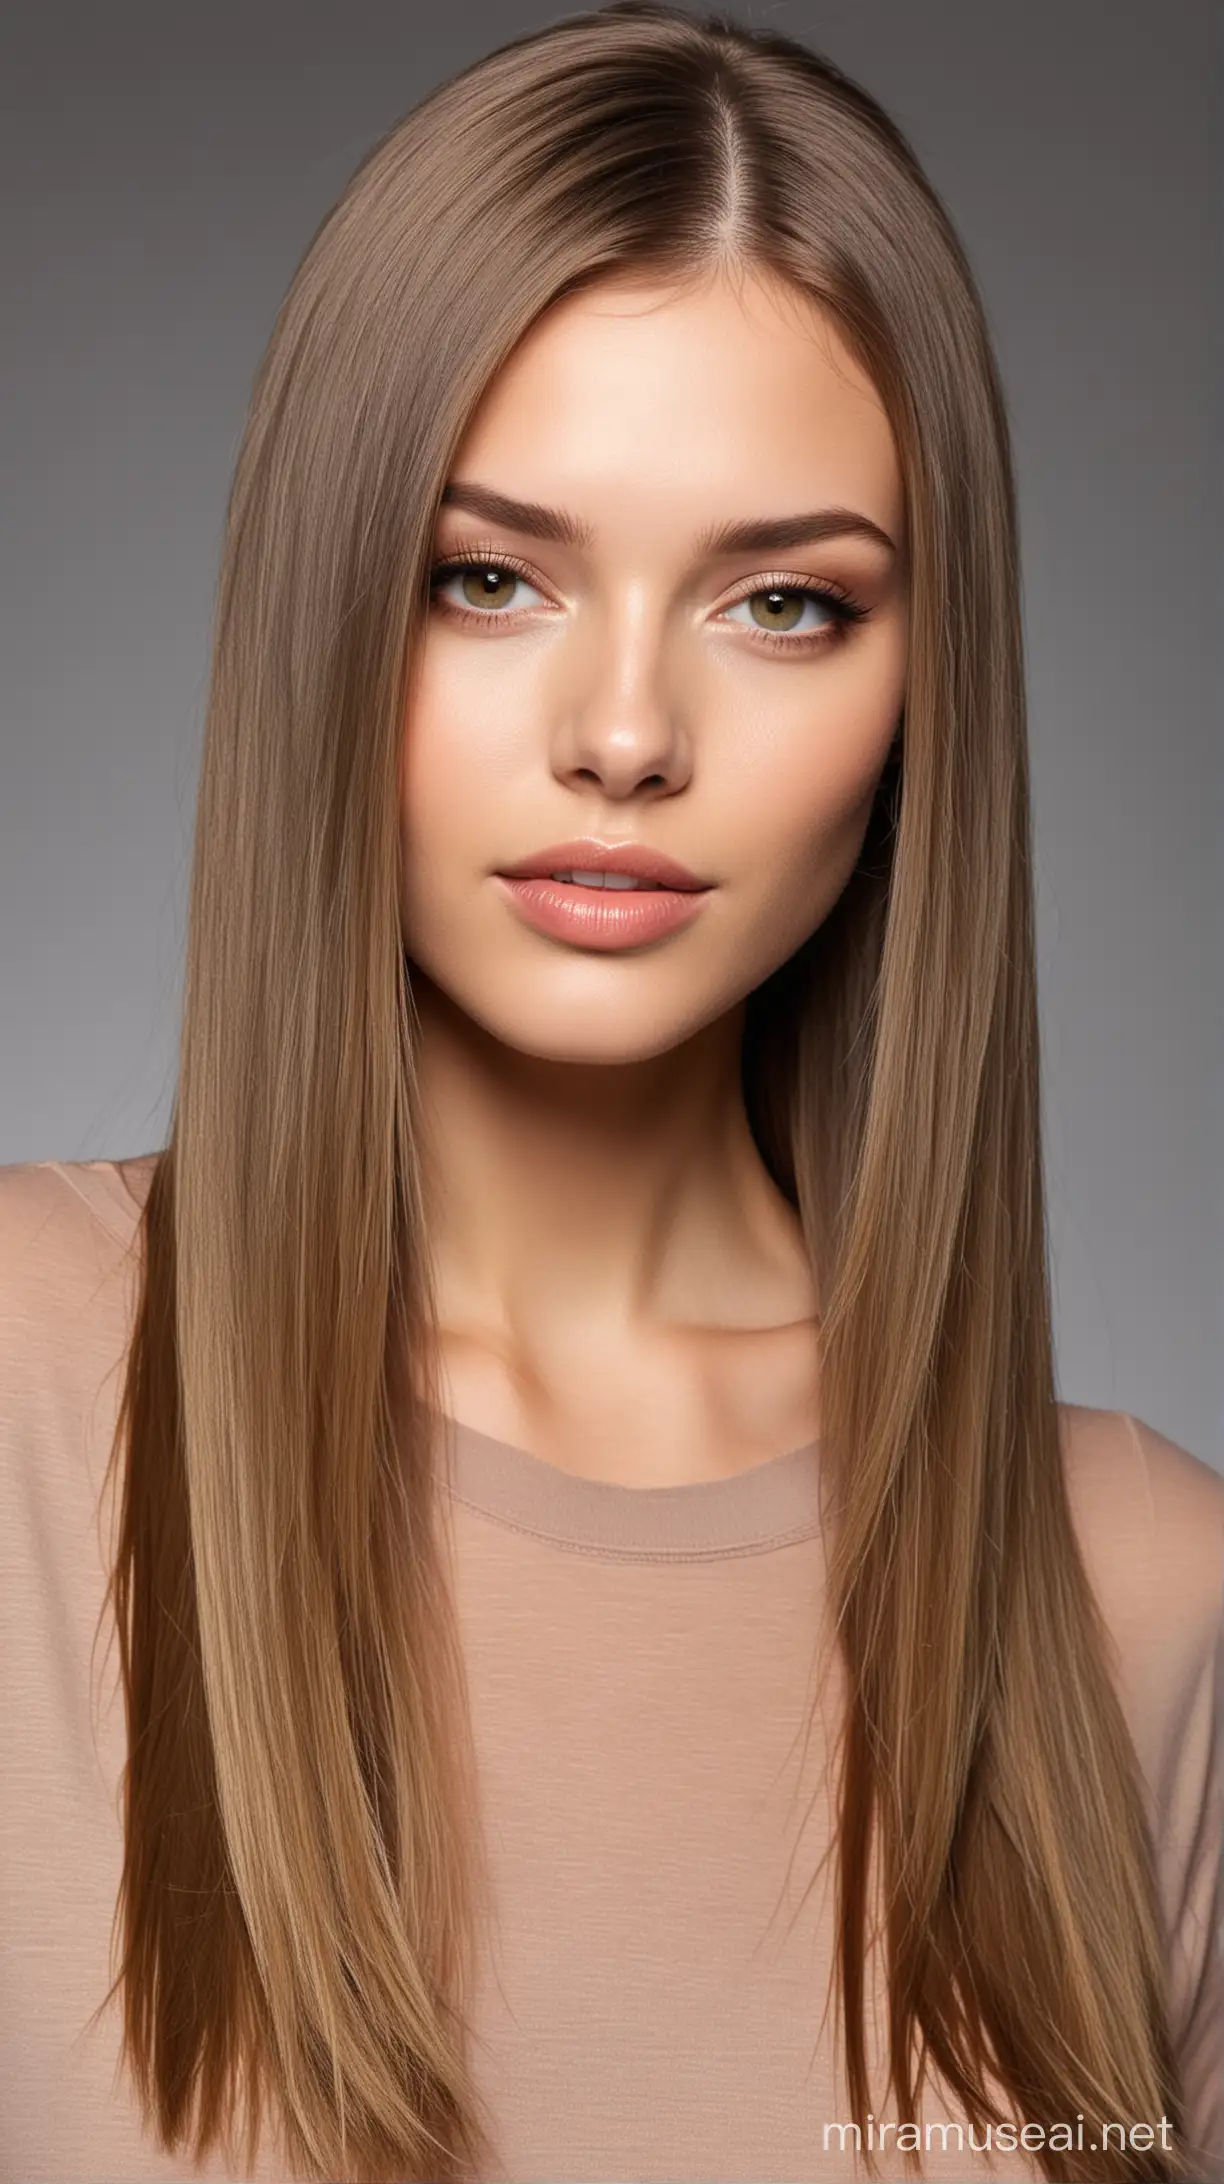 Model with straight hair